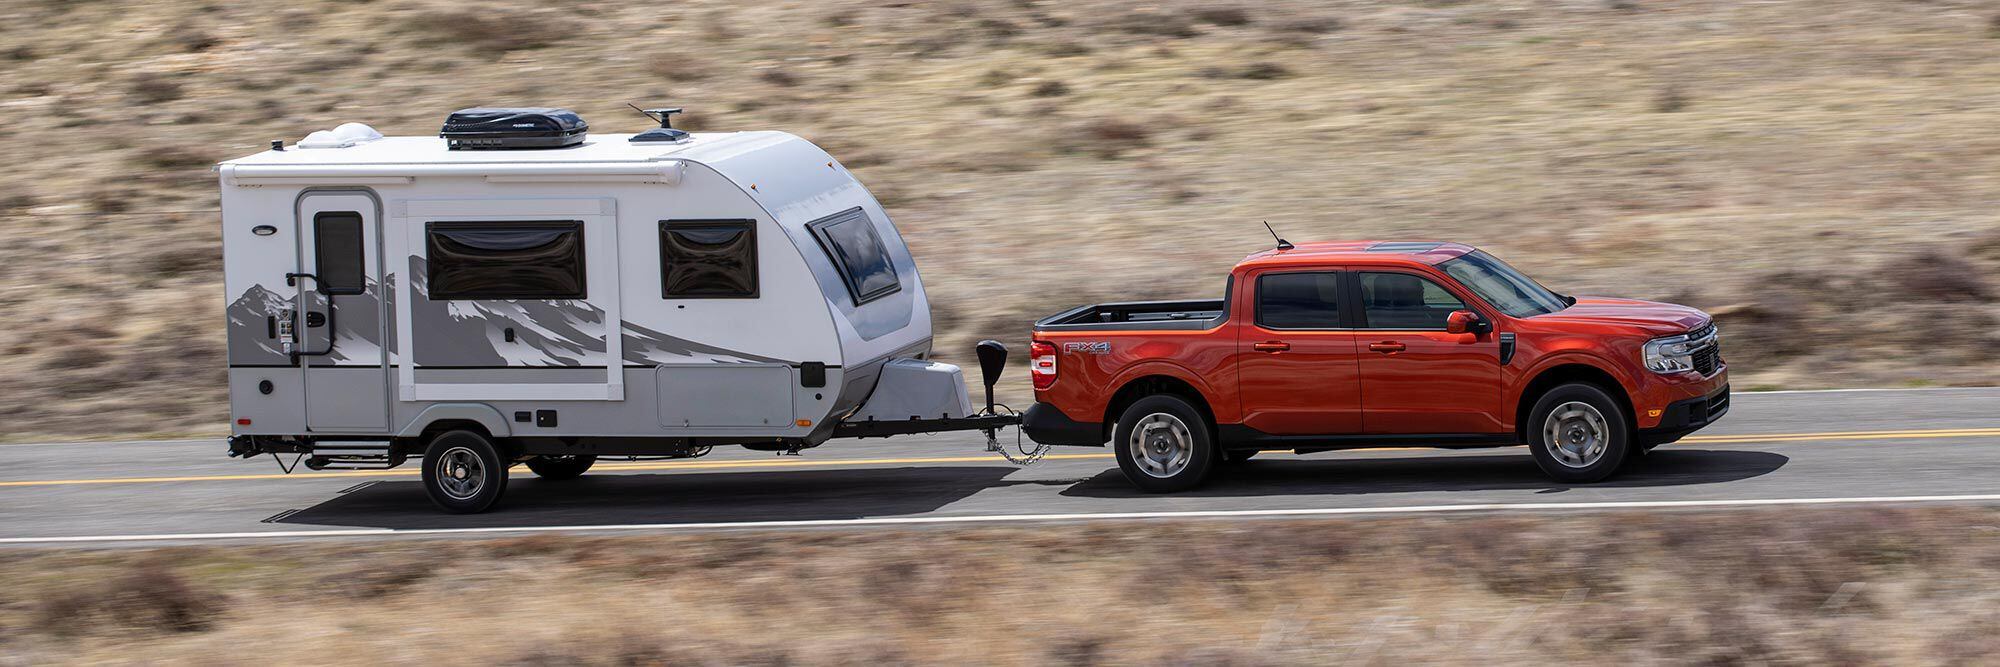 Standard tow rating comes in at 2,000 pounds. Optional EcoBoost engine trims jump to 4,000 pounds of towing capacity.